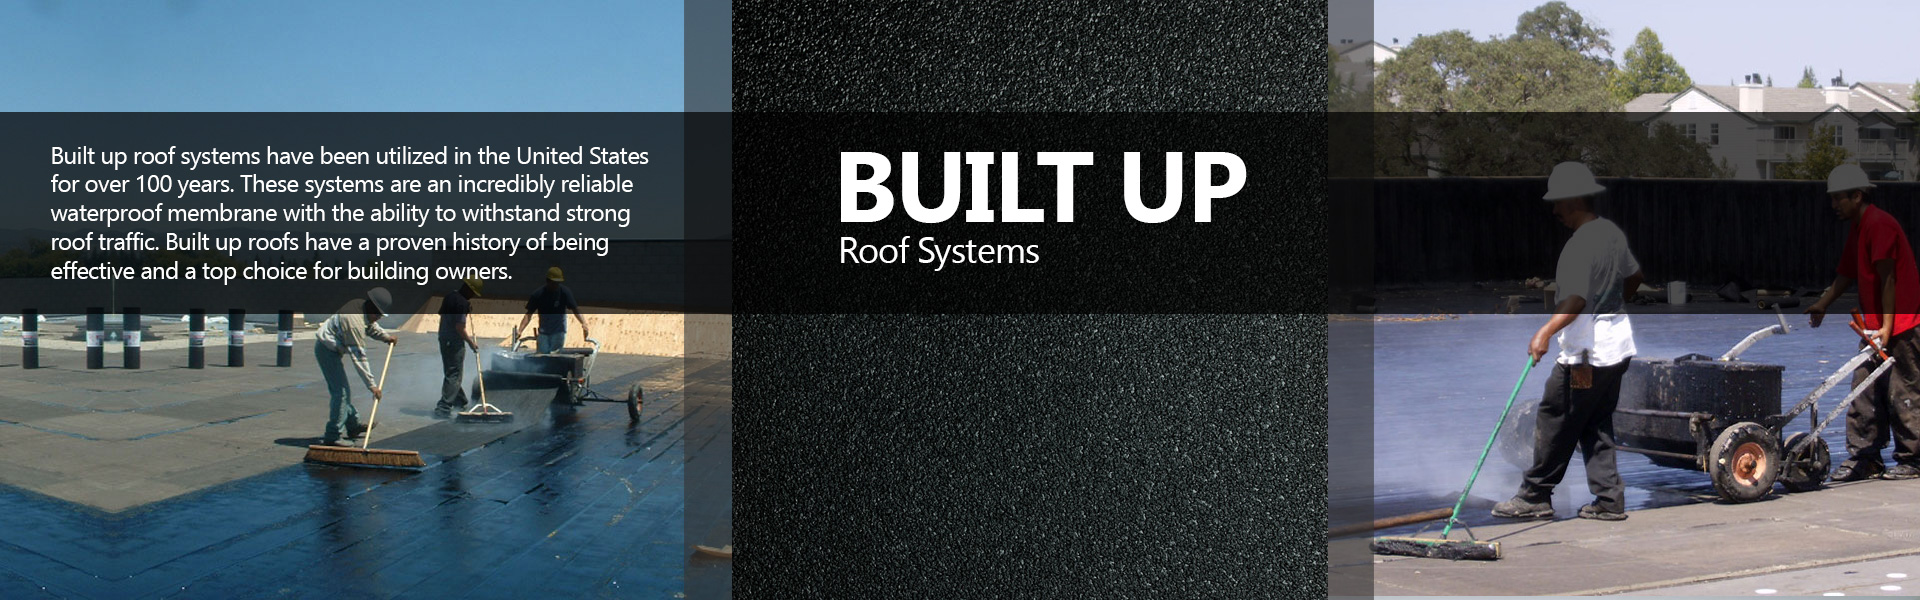 built-up-roofing